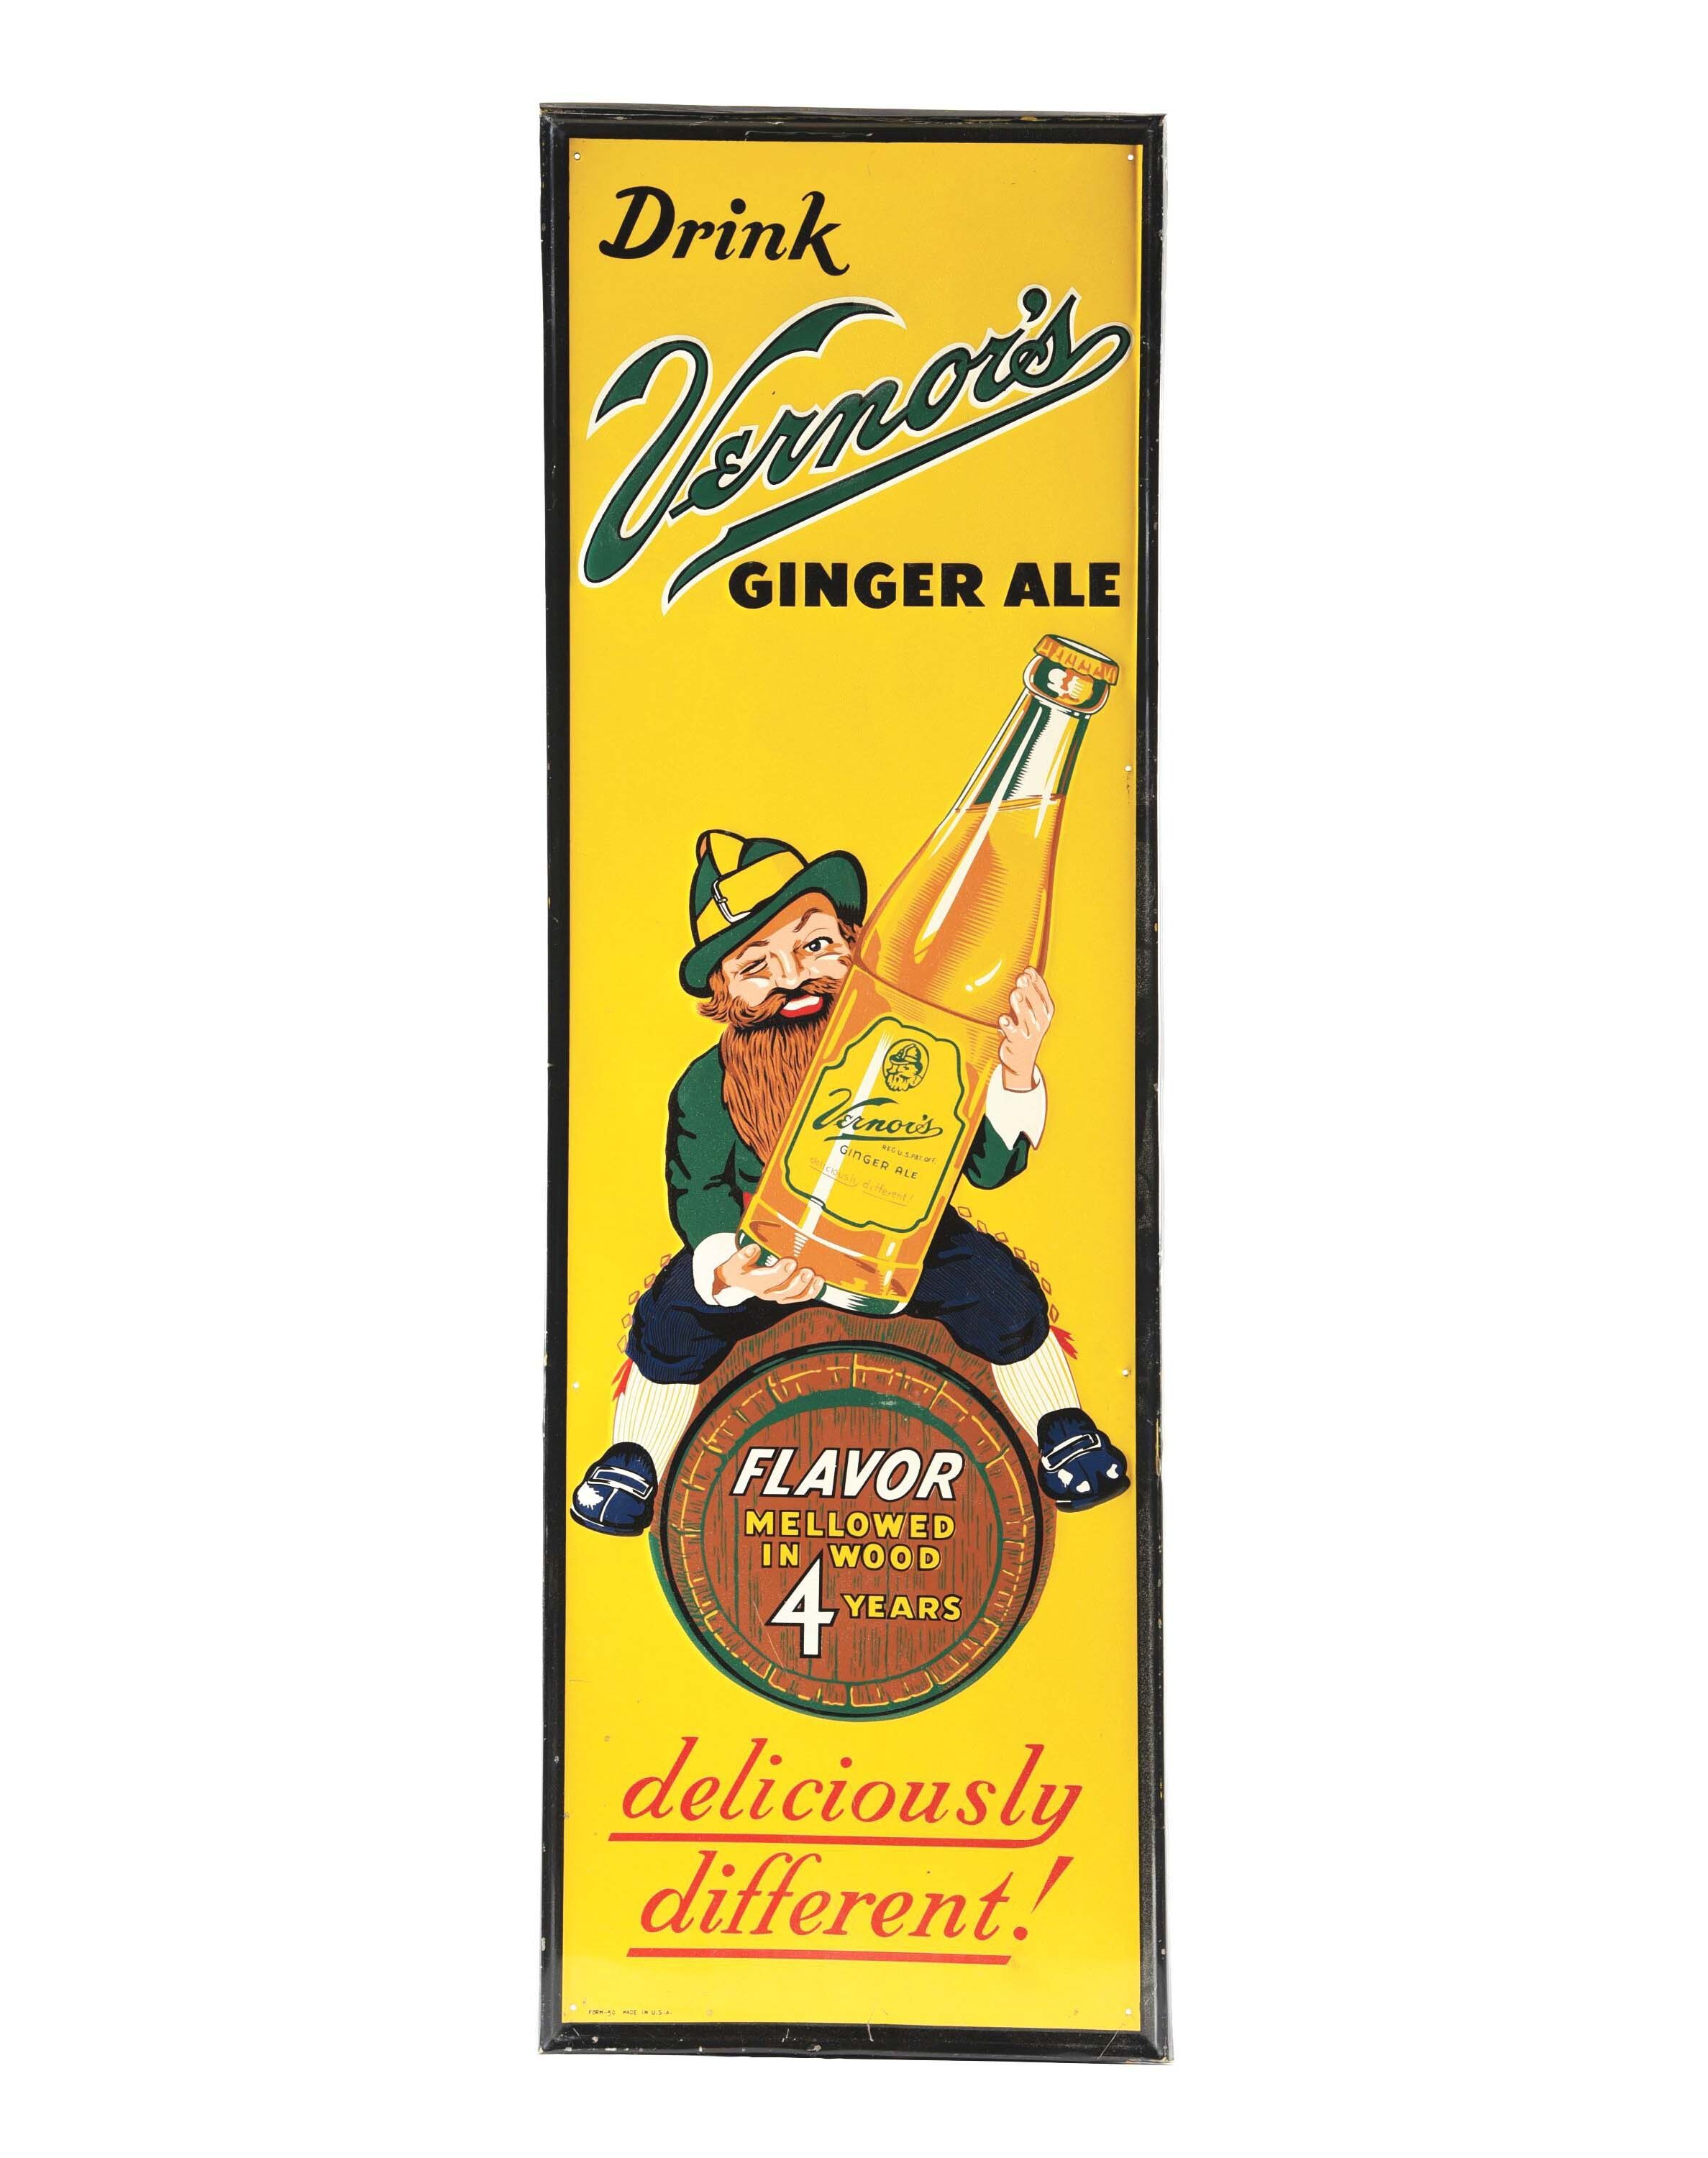 Self-framed embossed tin Vernor’s Ginger Ale sign with image of the company’s Mountie mascot. Size: 54½ x 17¾in. Condition 8.9. Estimate $3,500-$7,000